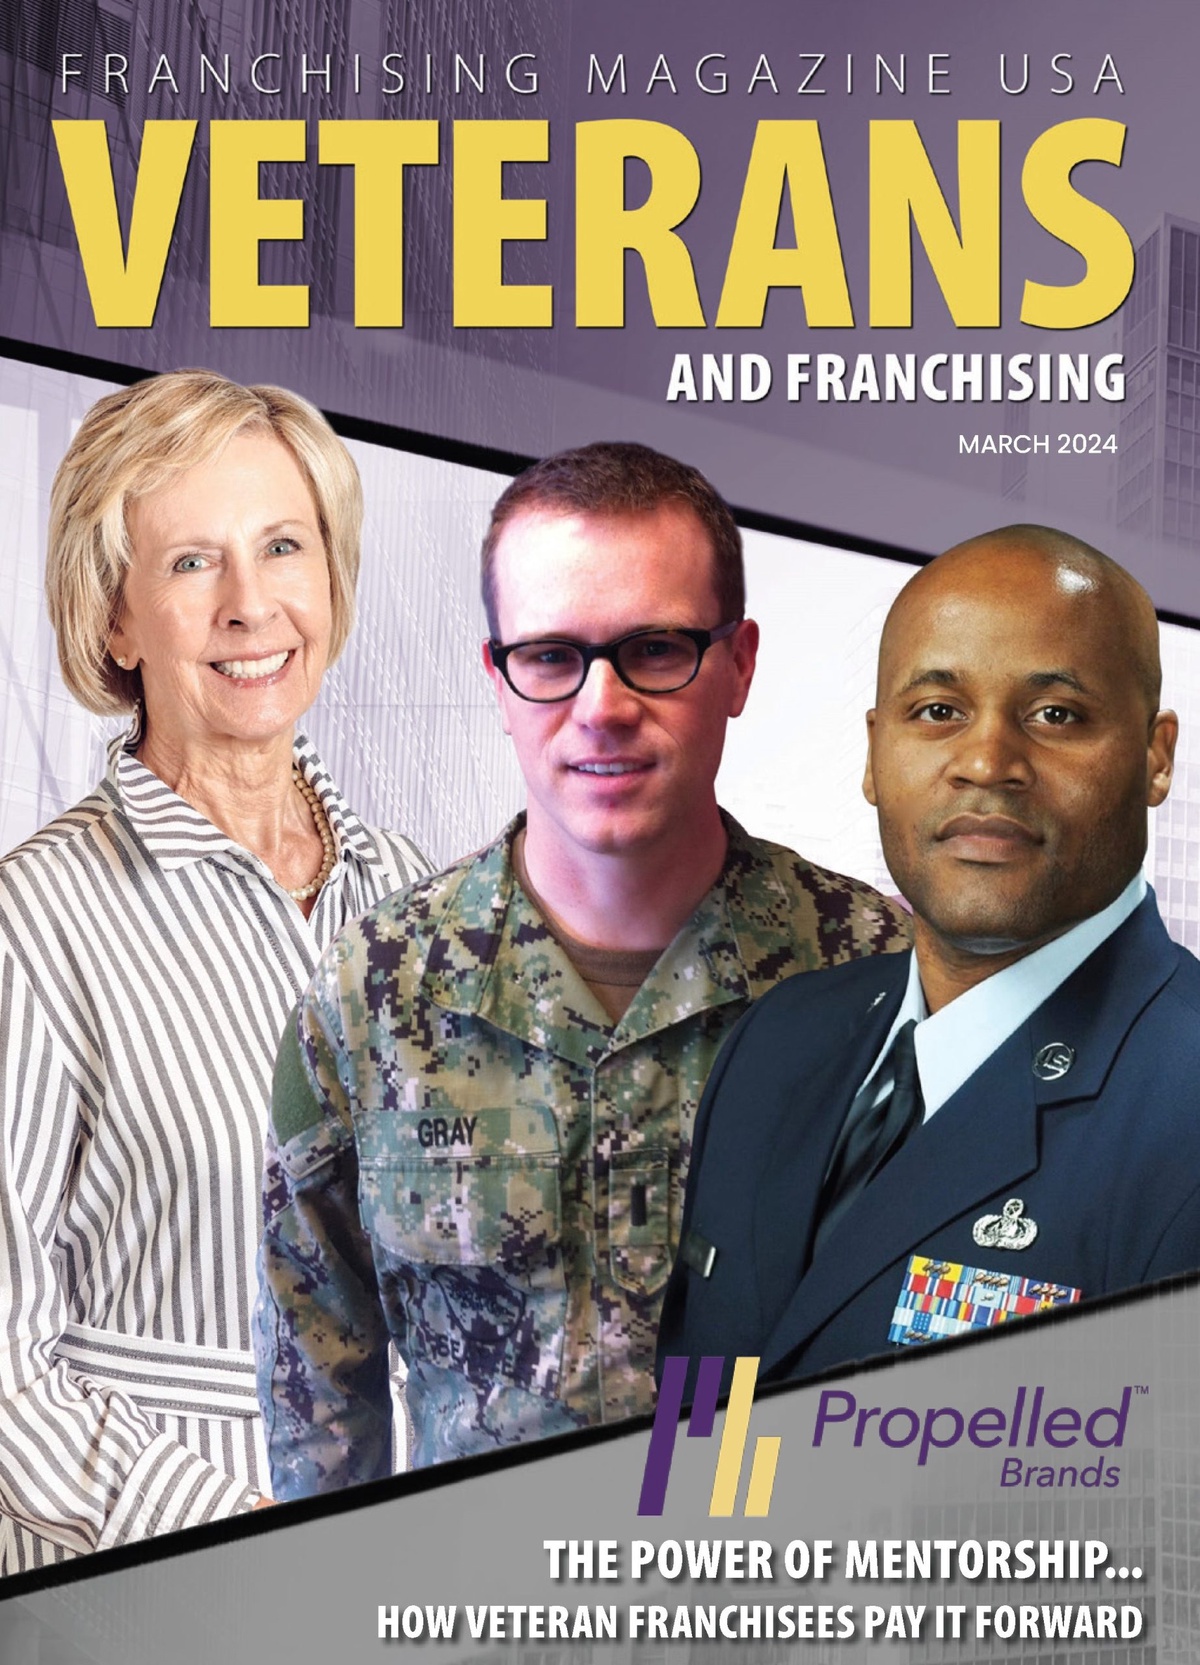 From Military to Management: Franchising Opportunities for Veterans